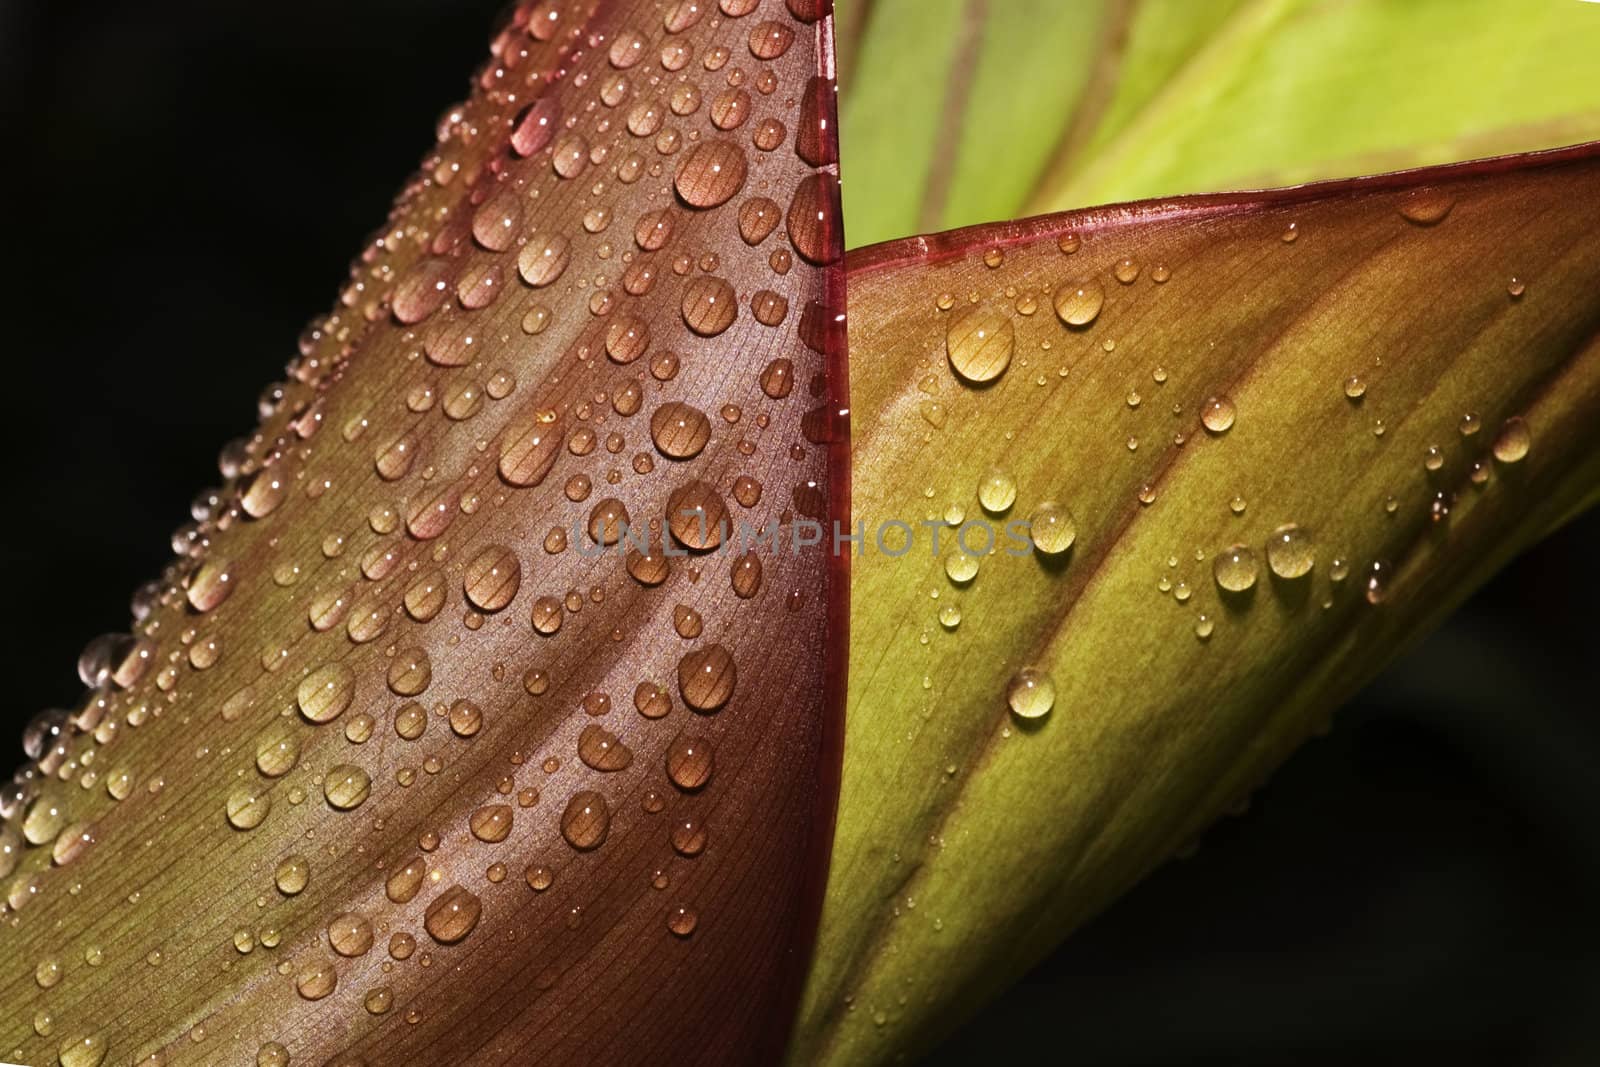 Abstract shapes - a unique leaf with water drops - shallow depth of field.